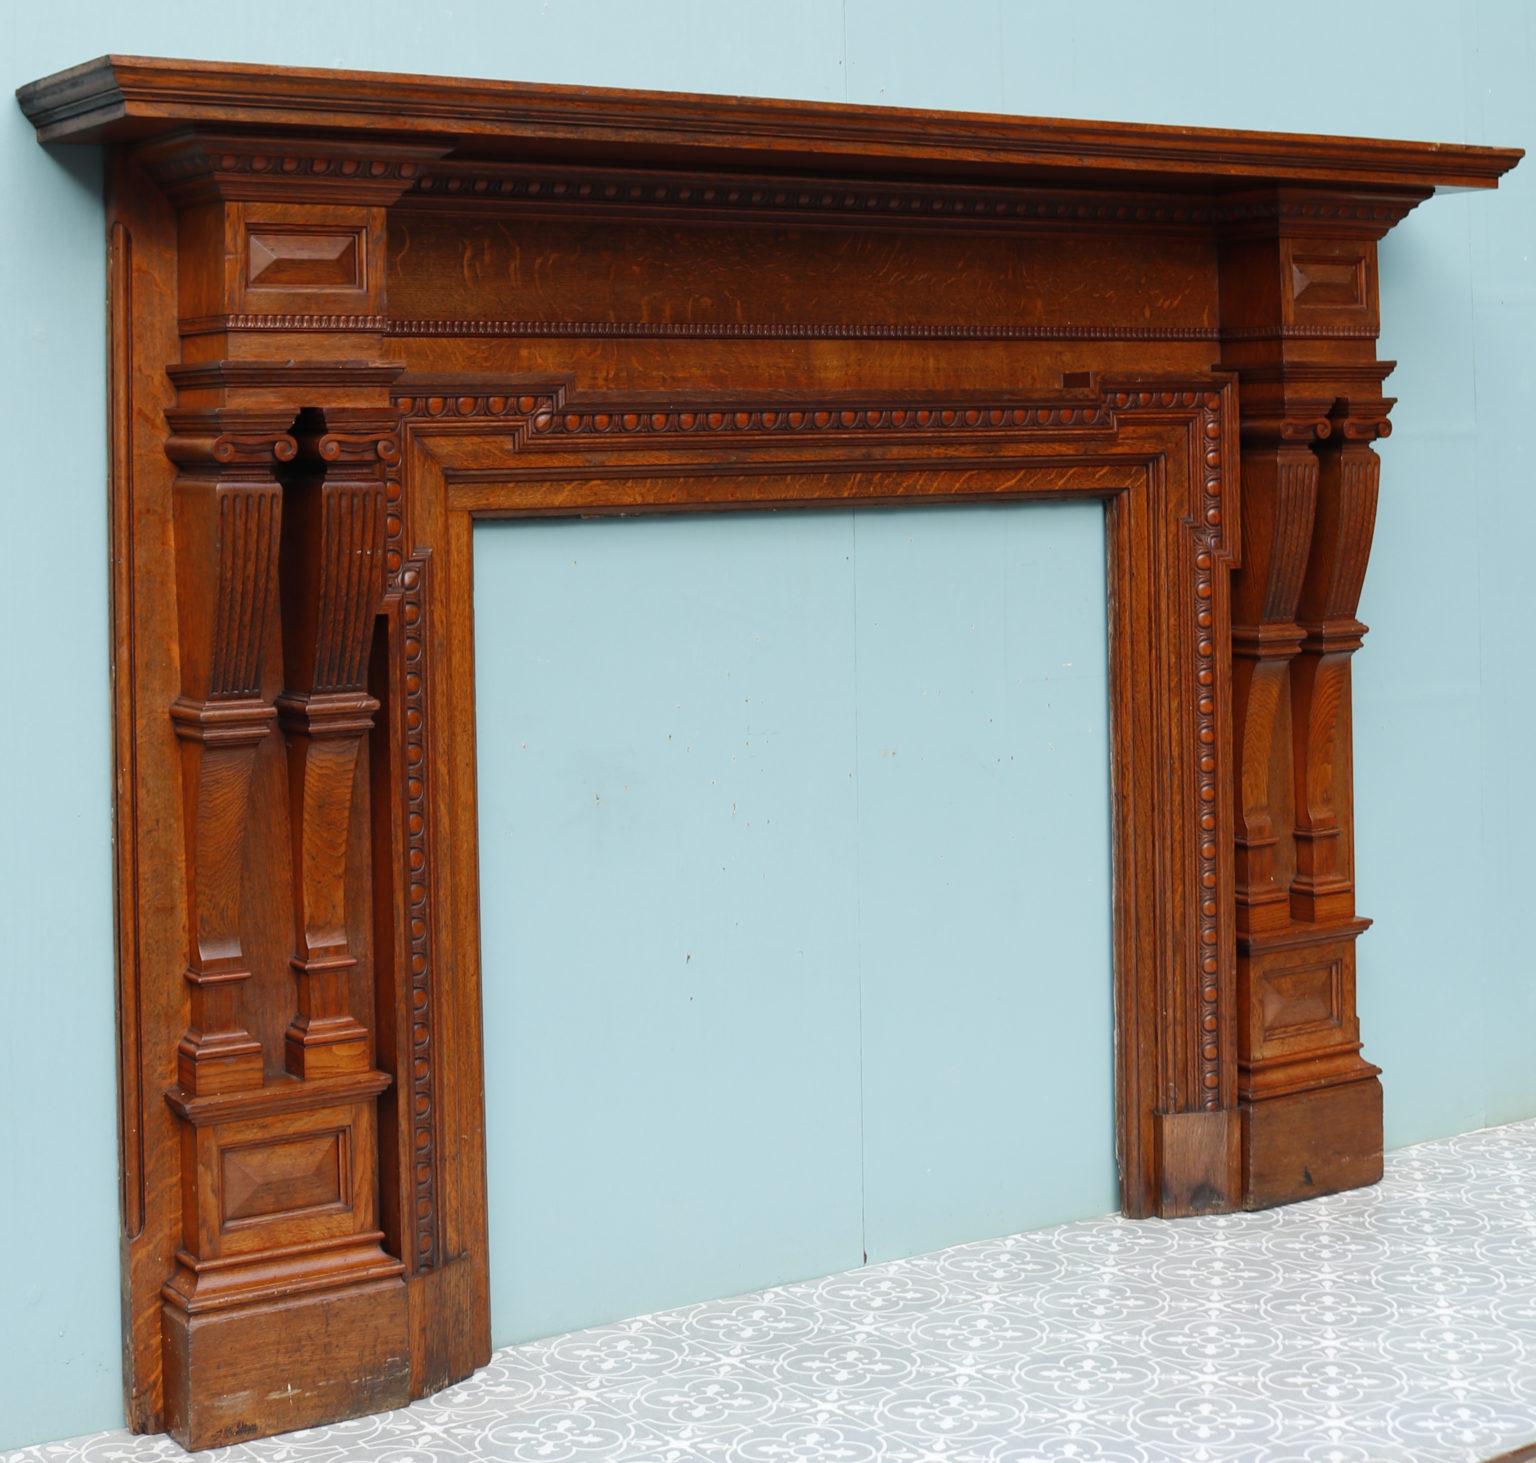 A very large and impressive Victorian period fireplace surround constructed from oak.

Additional dimensions:

Opening height 101.5 cm

Opening width 102 cm

Width between outsides of the foot blocks 194 cm.